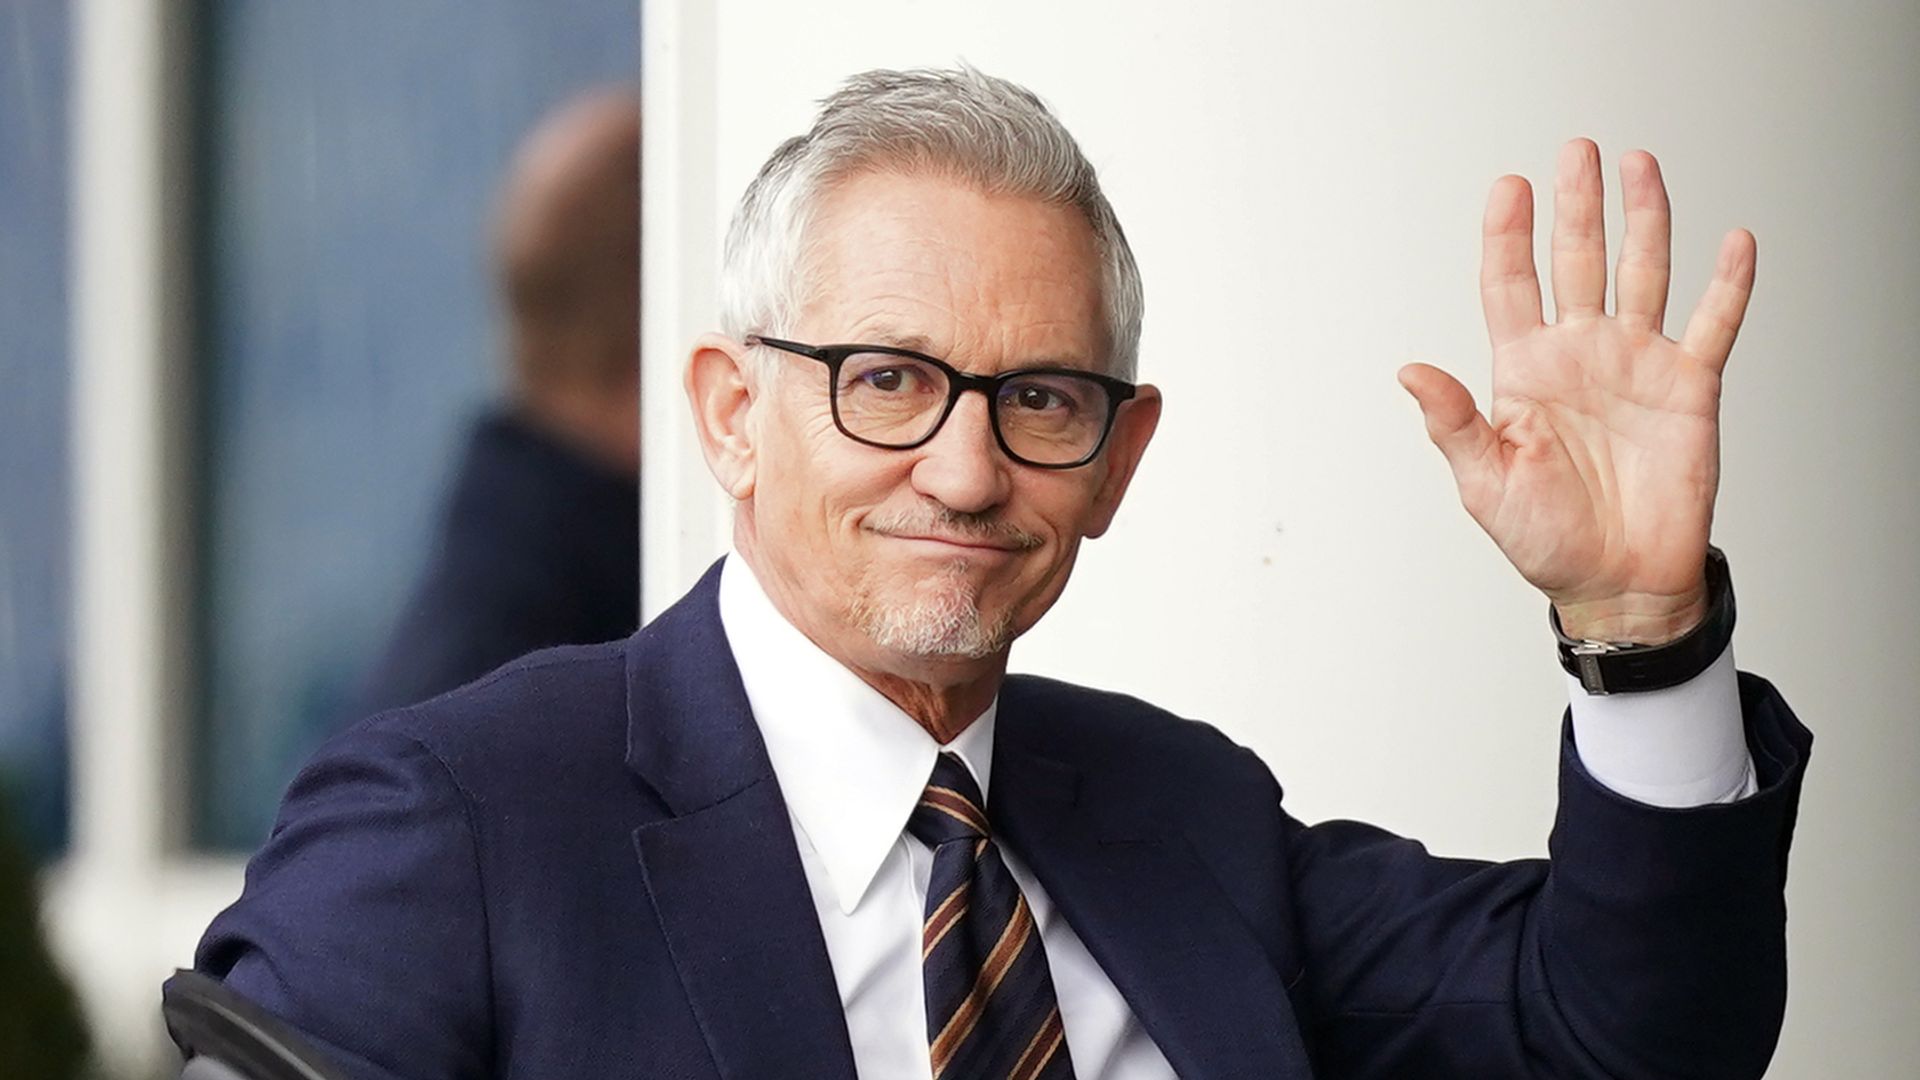 Sources close to Lineker confident of BBC resolution in next 24 hours